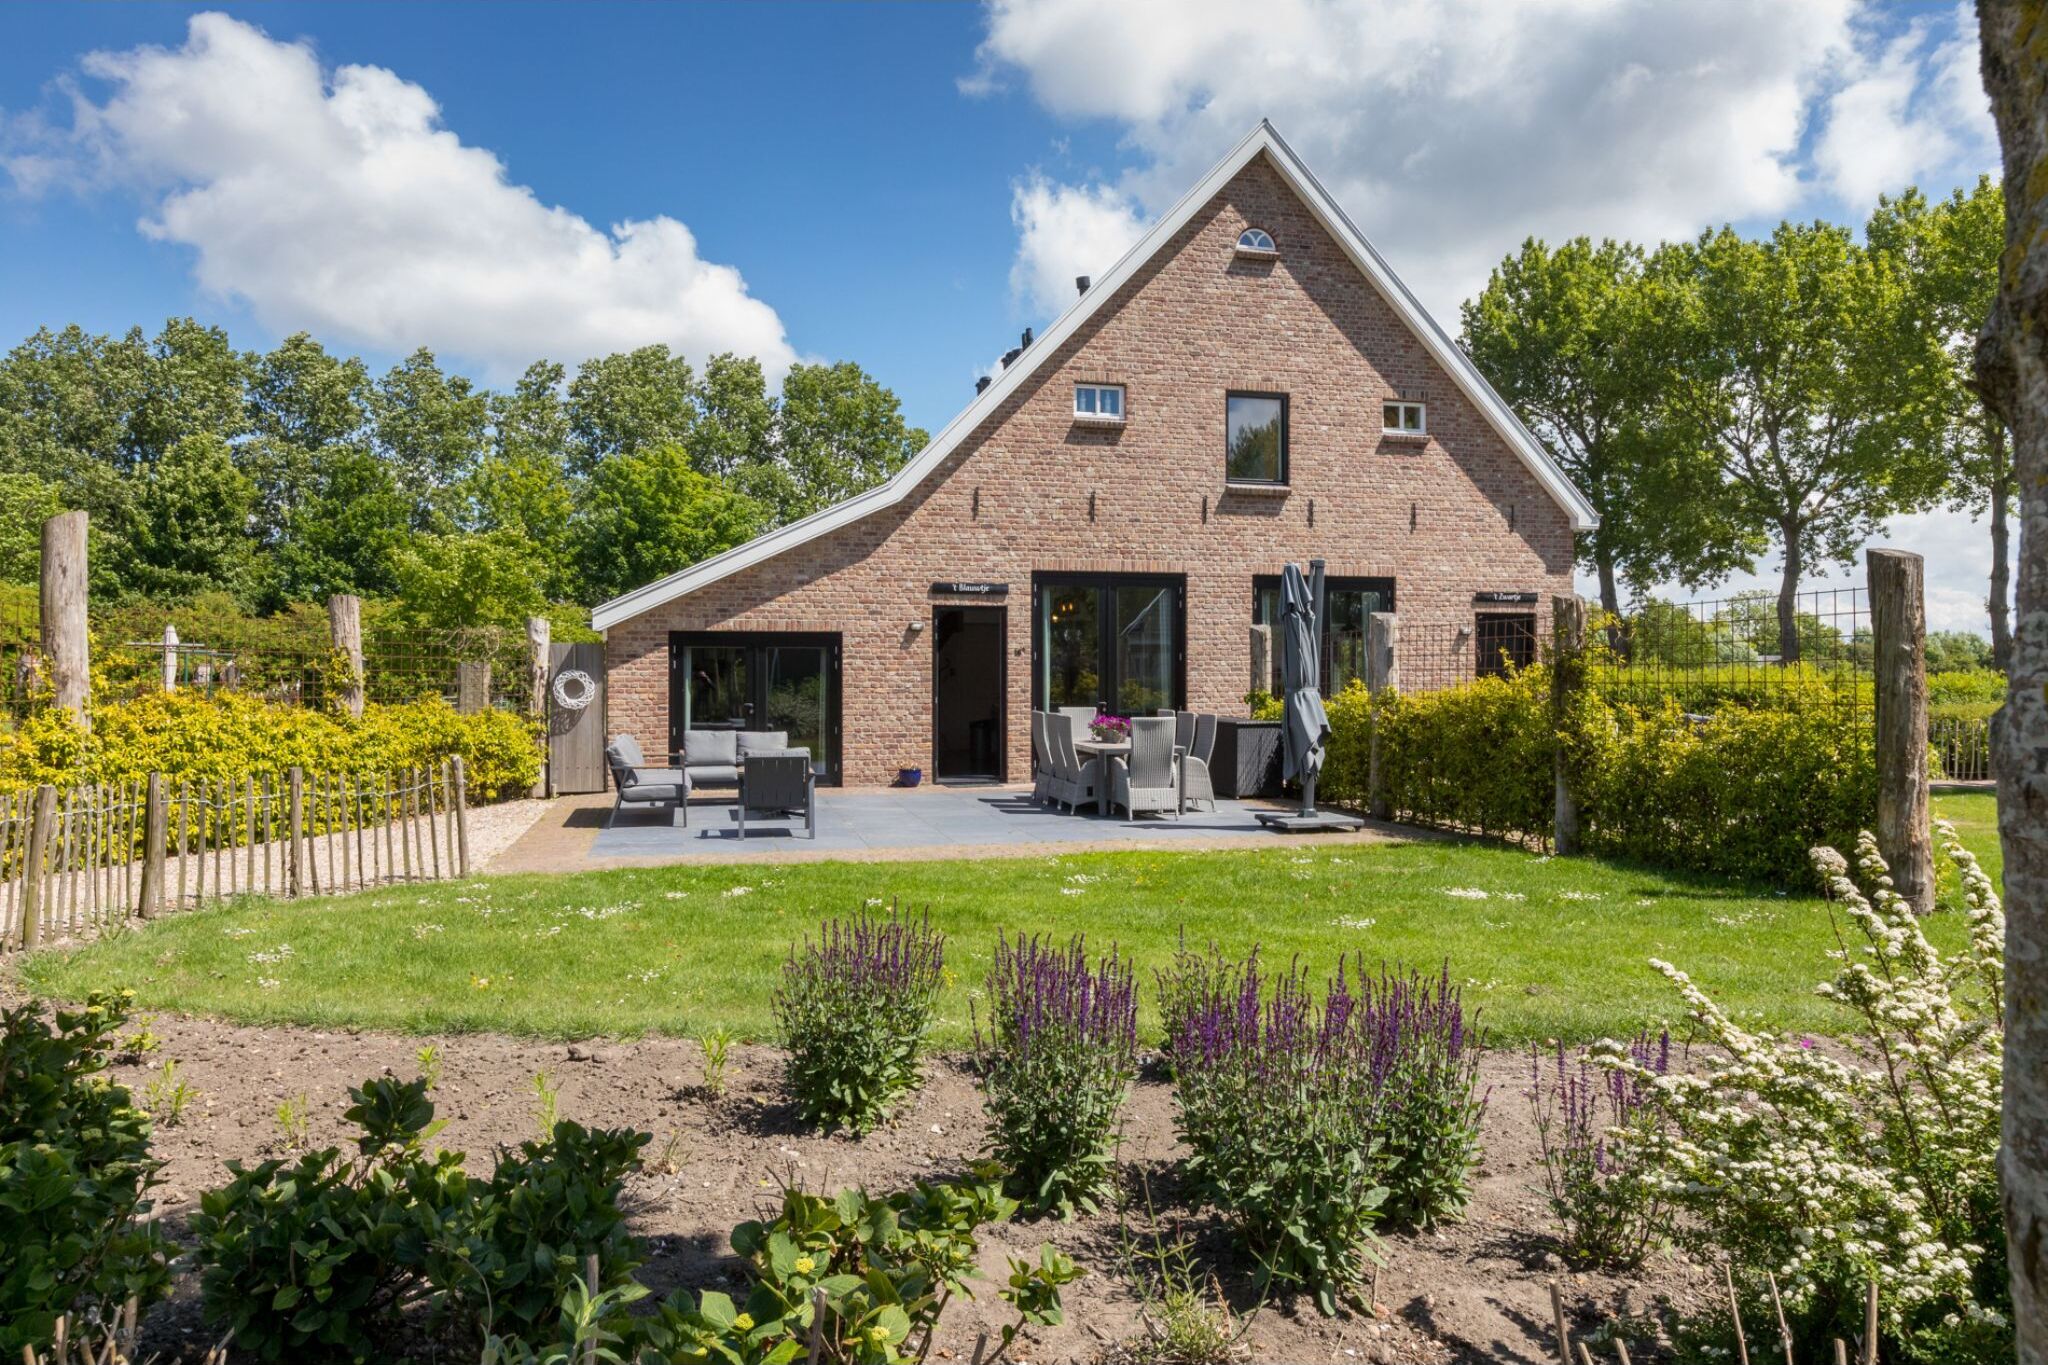 Majestic mansion in Vrouwenpolder with private garden